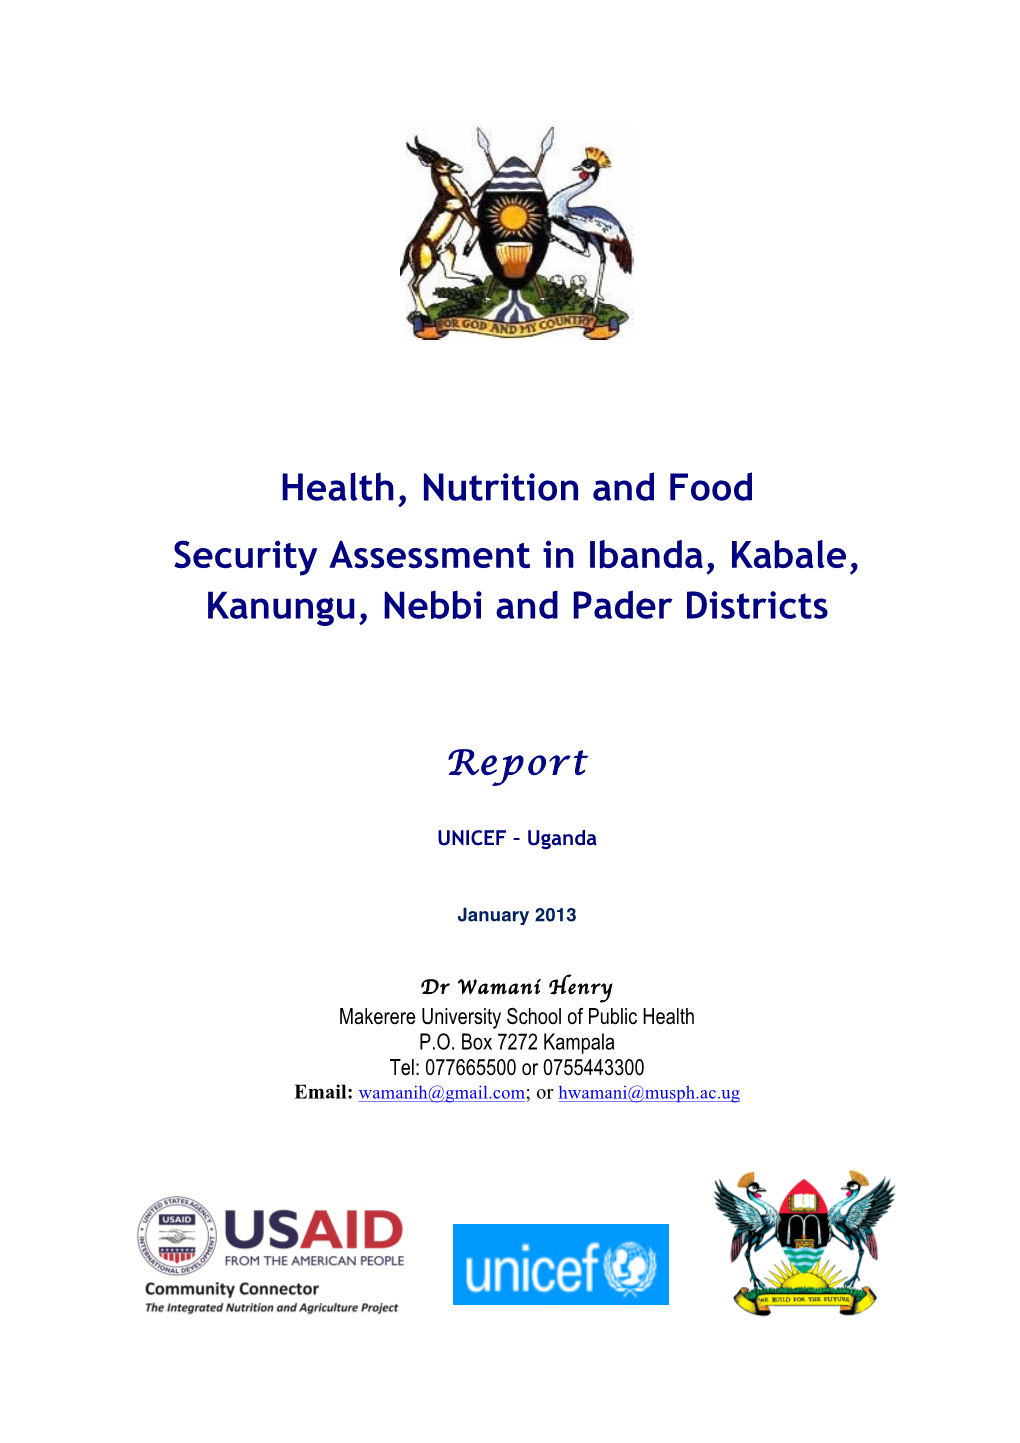 Health, Nutrition and Food Security Assessment in Ibanda, Kabale, Kanungu, Nebbi and Pader Districts